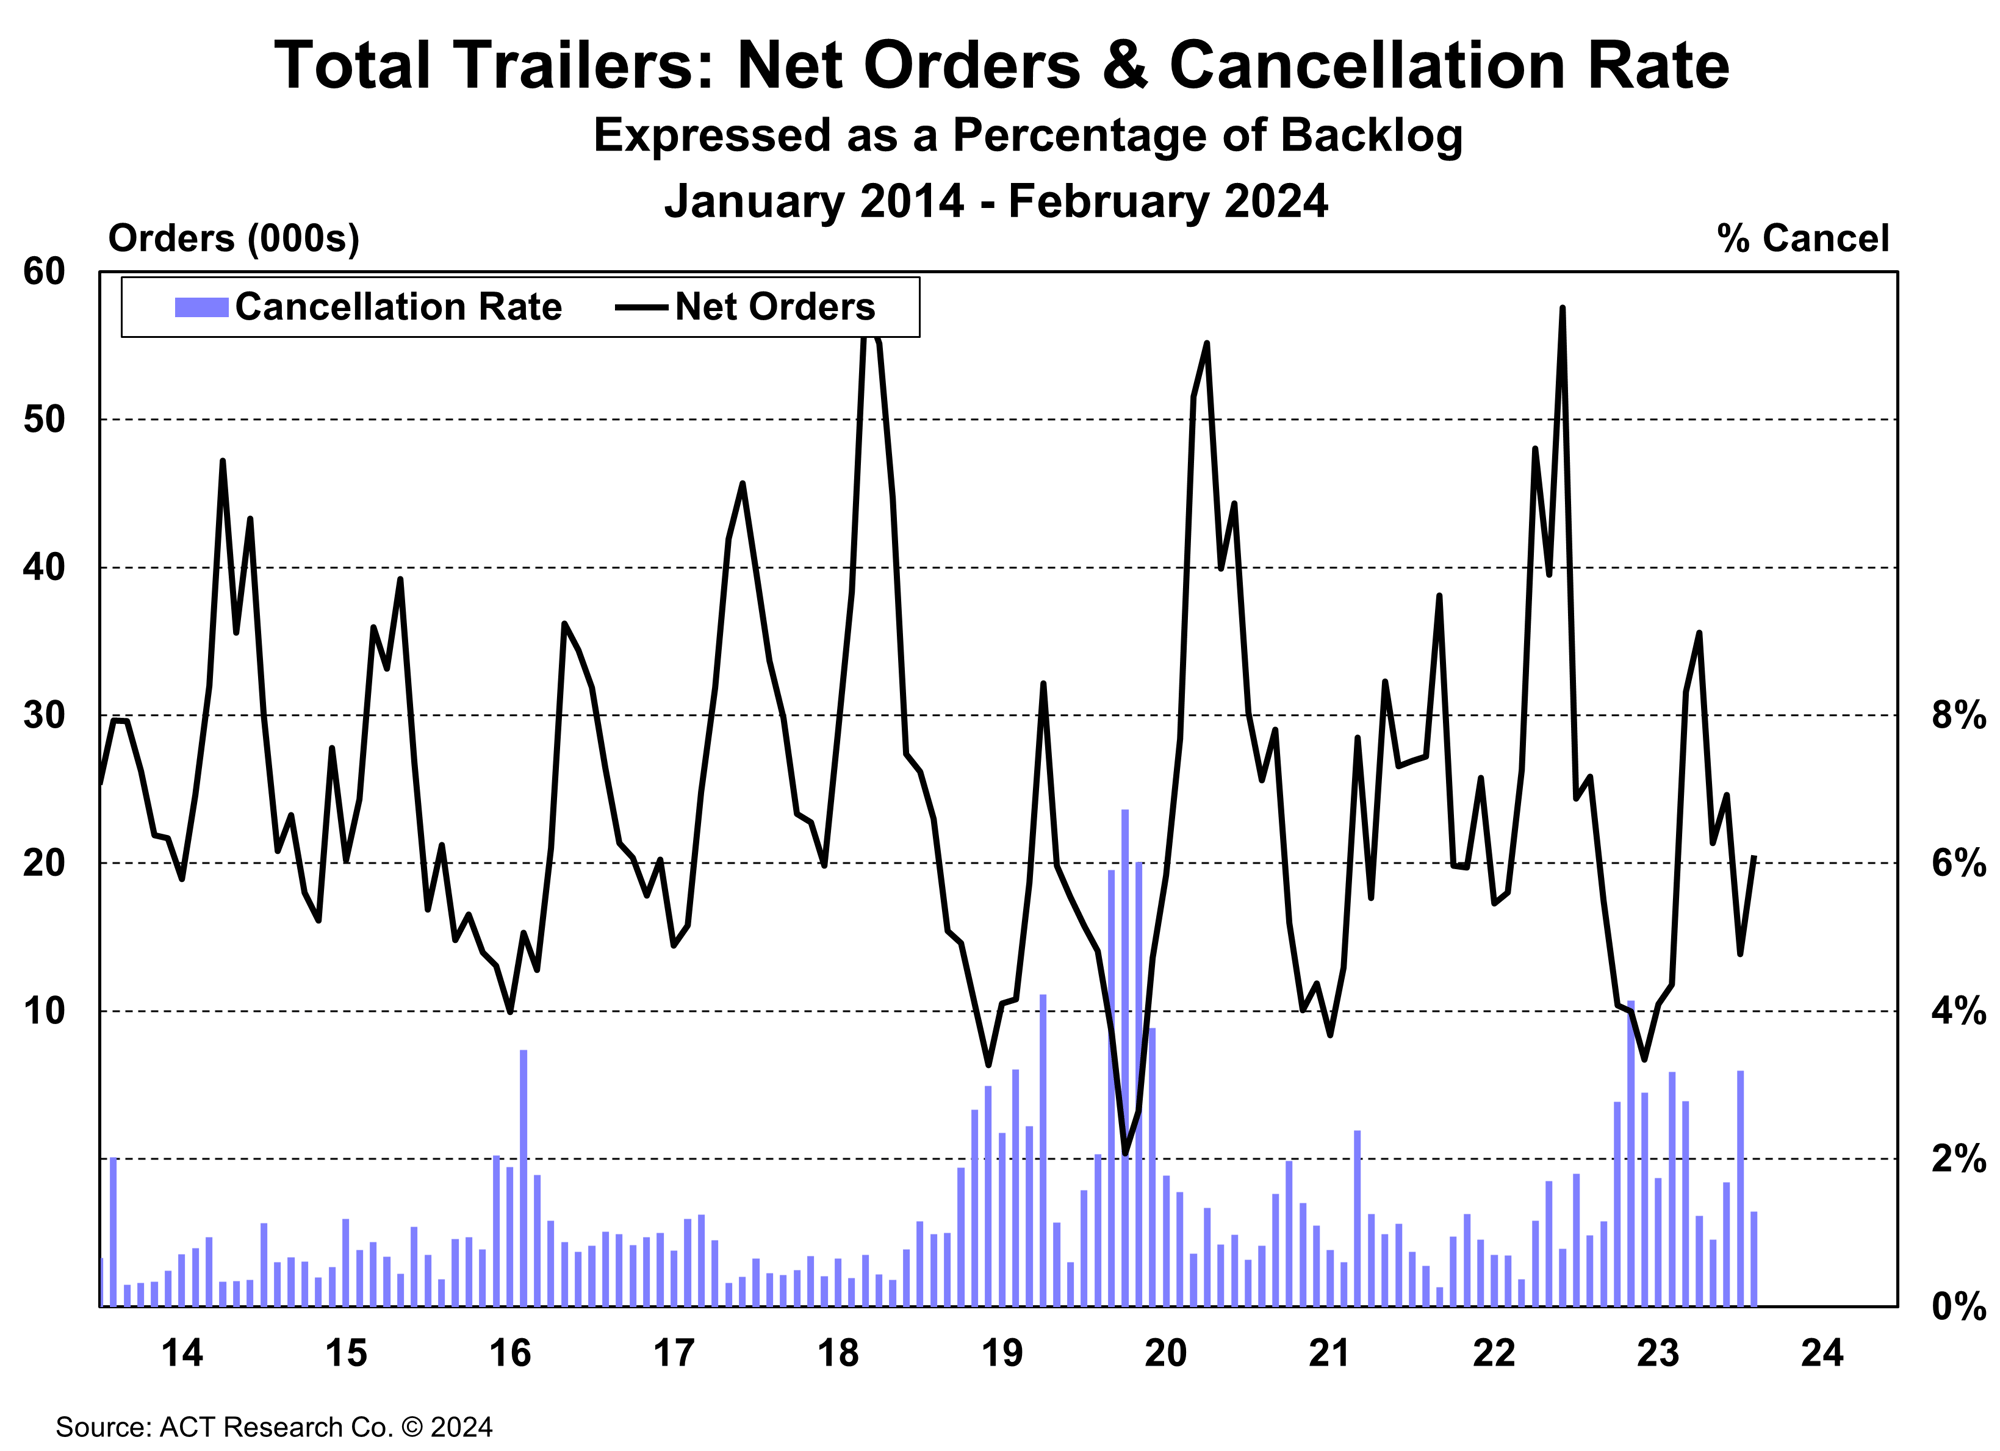 US Trailer Net Orders and Cancellation Rate February 2024